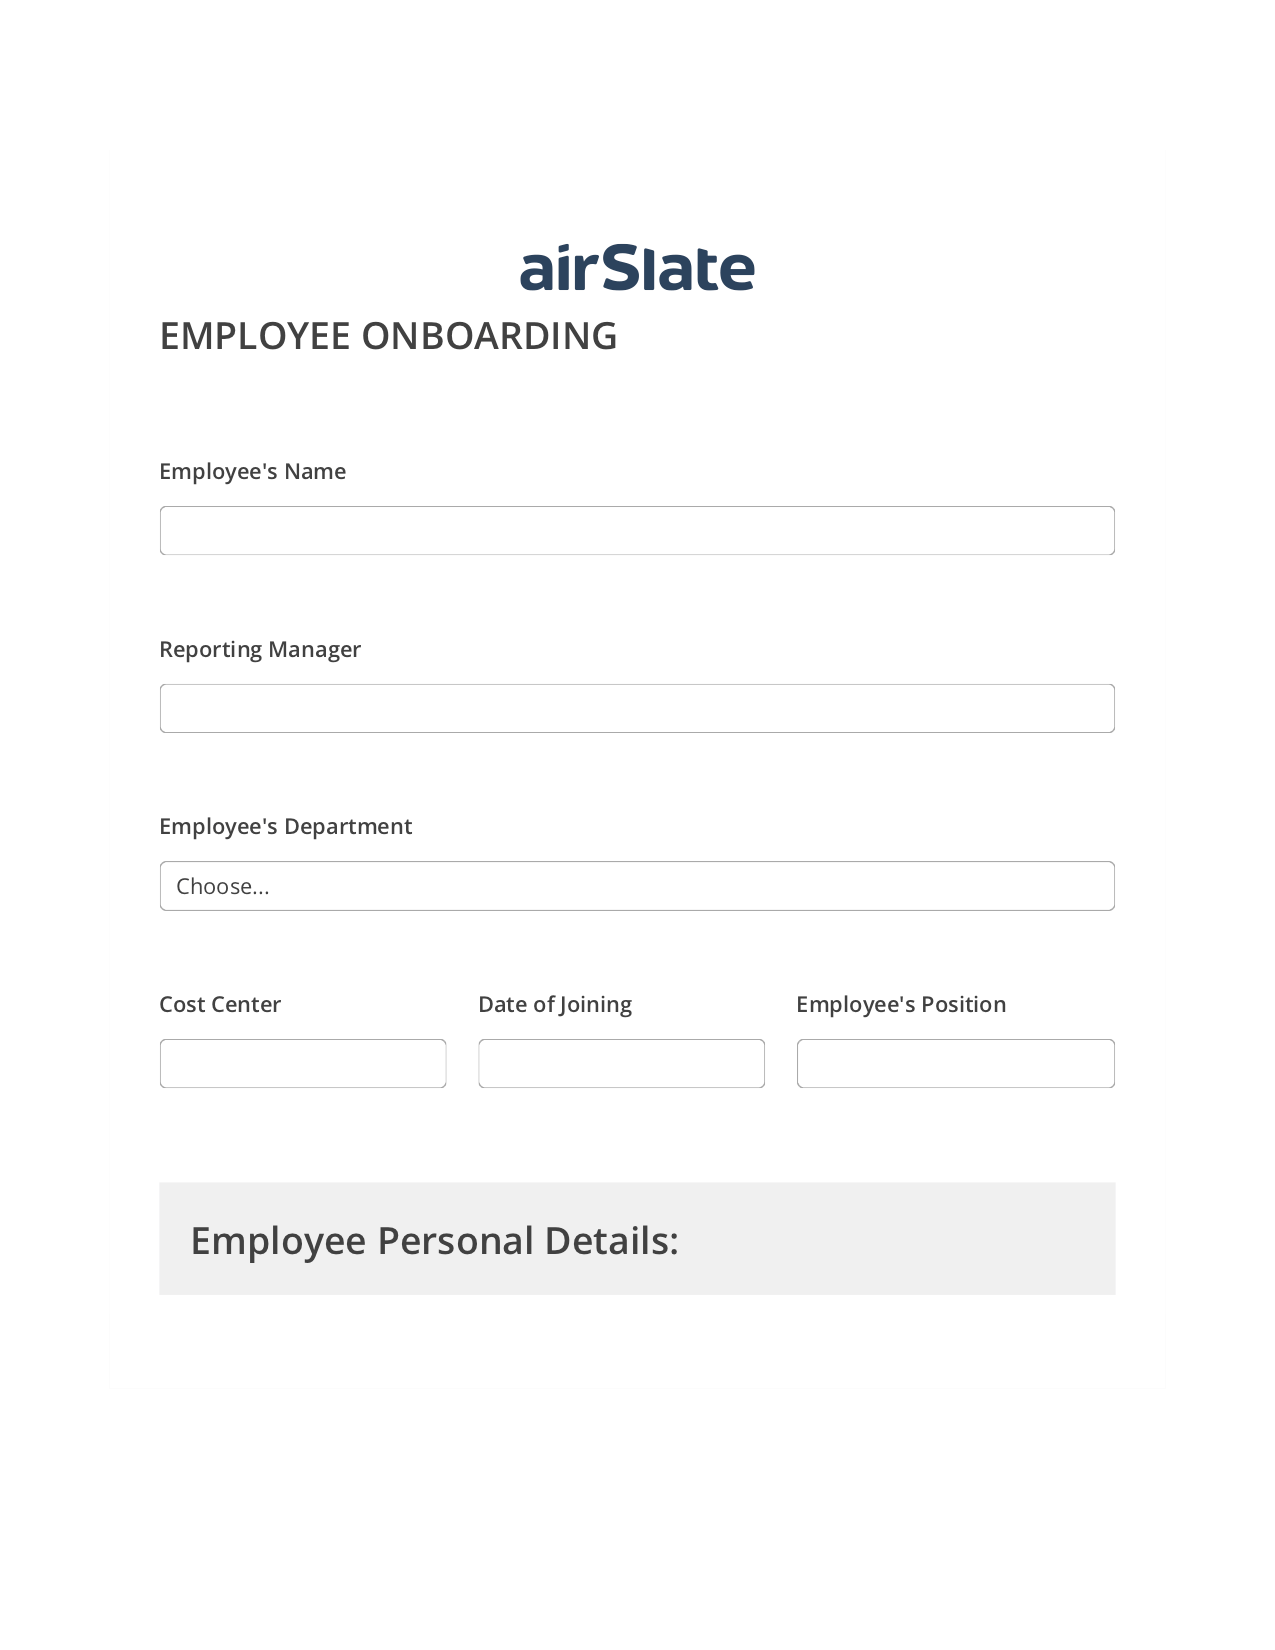 Employee Onboarding Workflow Pre-fill from MySQL Dropdown Options Bot, SendGrid send Campaign bot, Archive to SharePoint Folder Bot